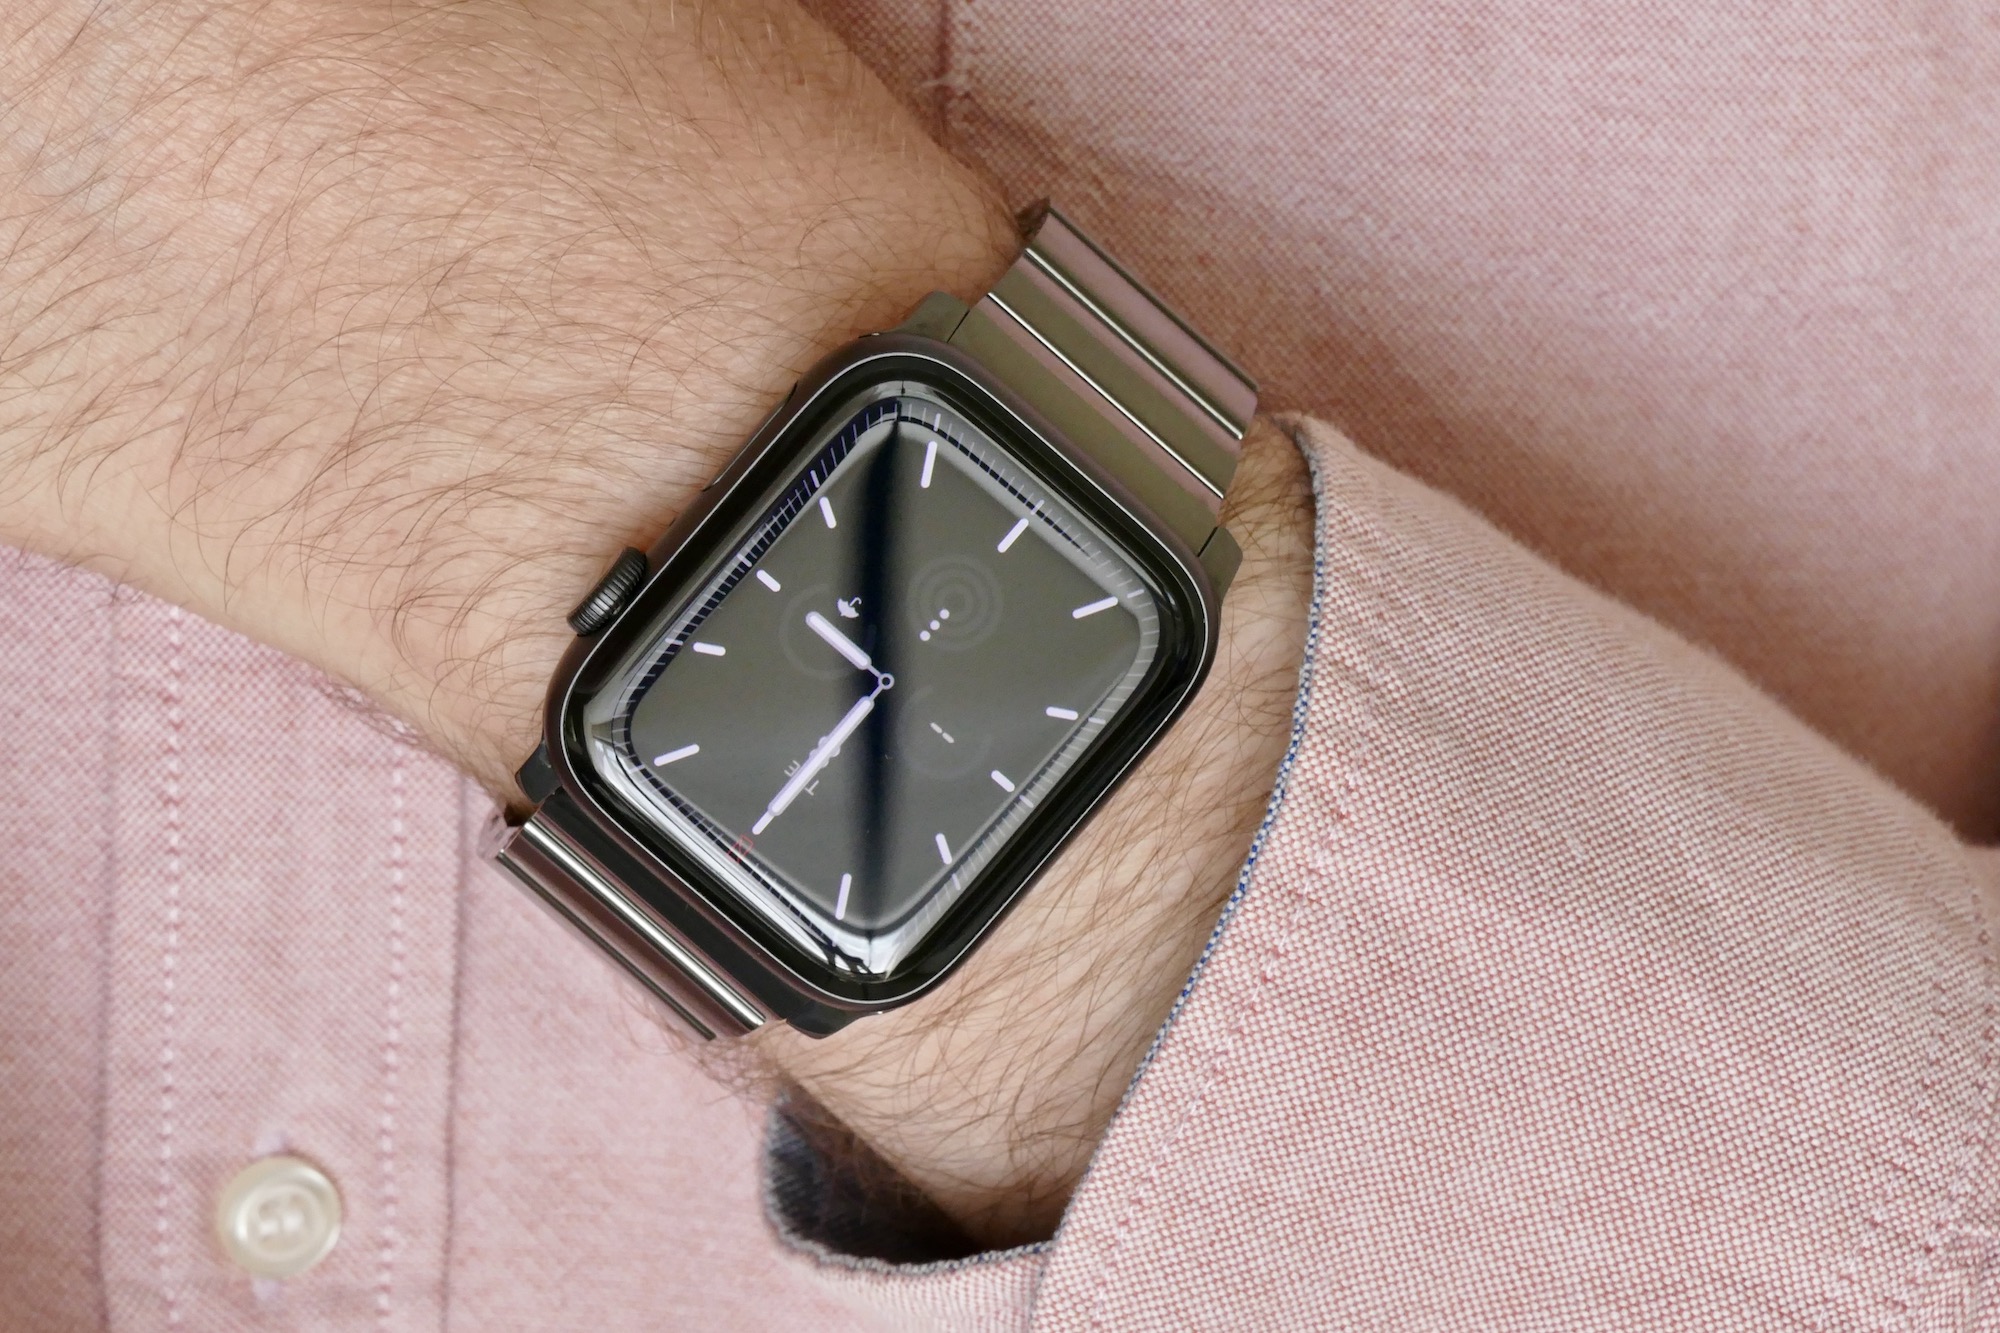 nomad titanium steel band apple watch hands on photos price release date space grey